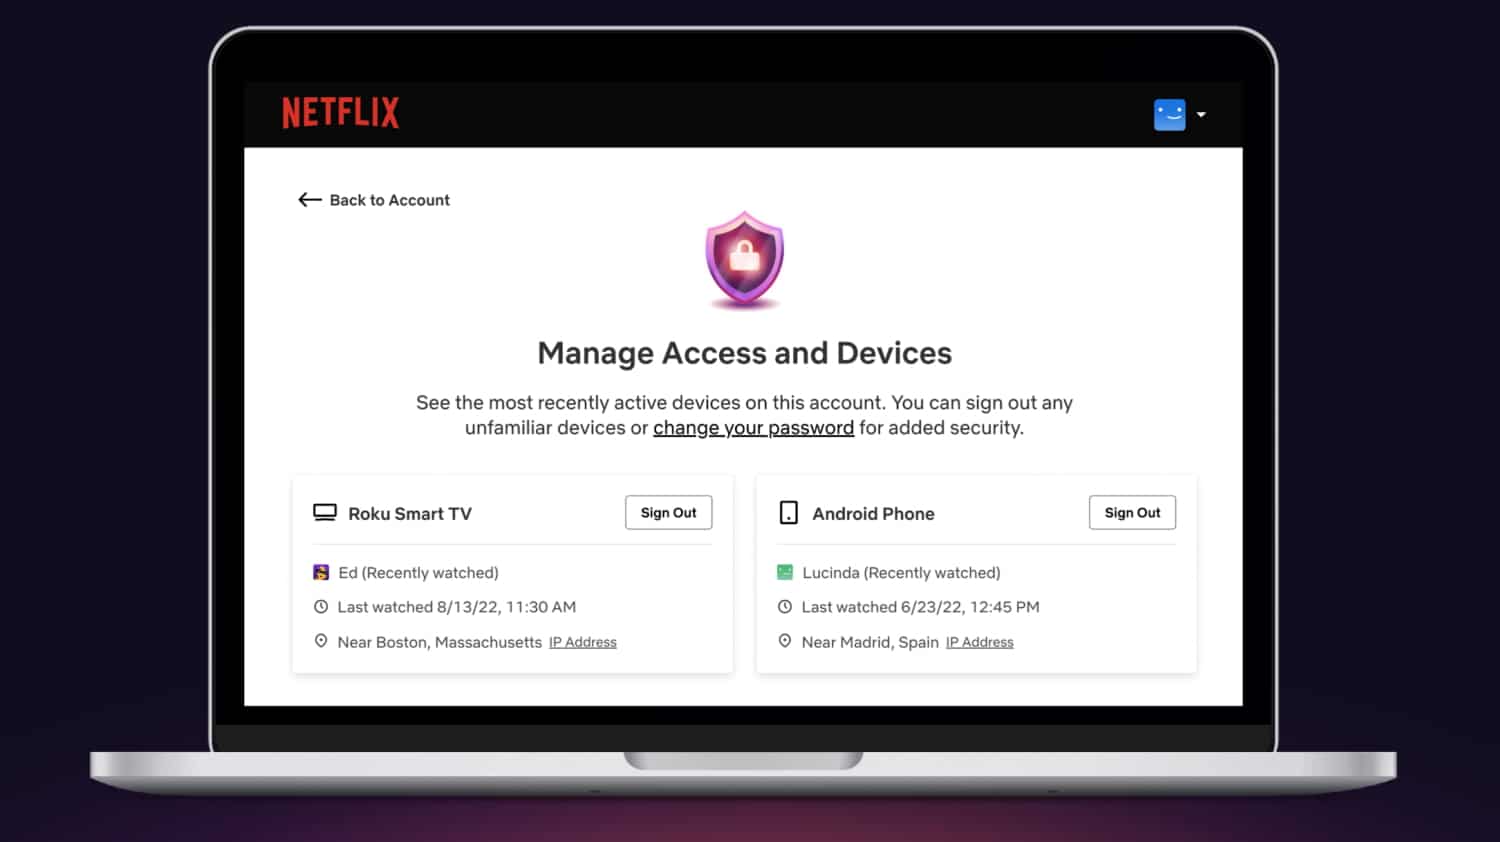 Netflix Launches Manage Access And Devices Feature To Let You Kick Devices From Your Account